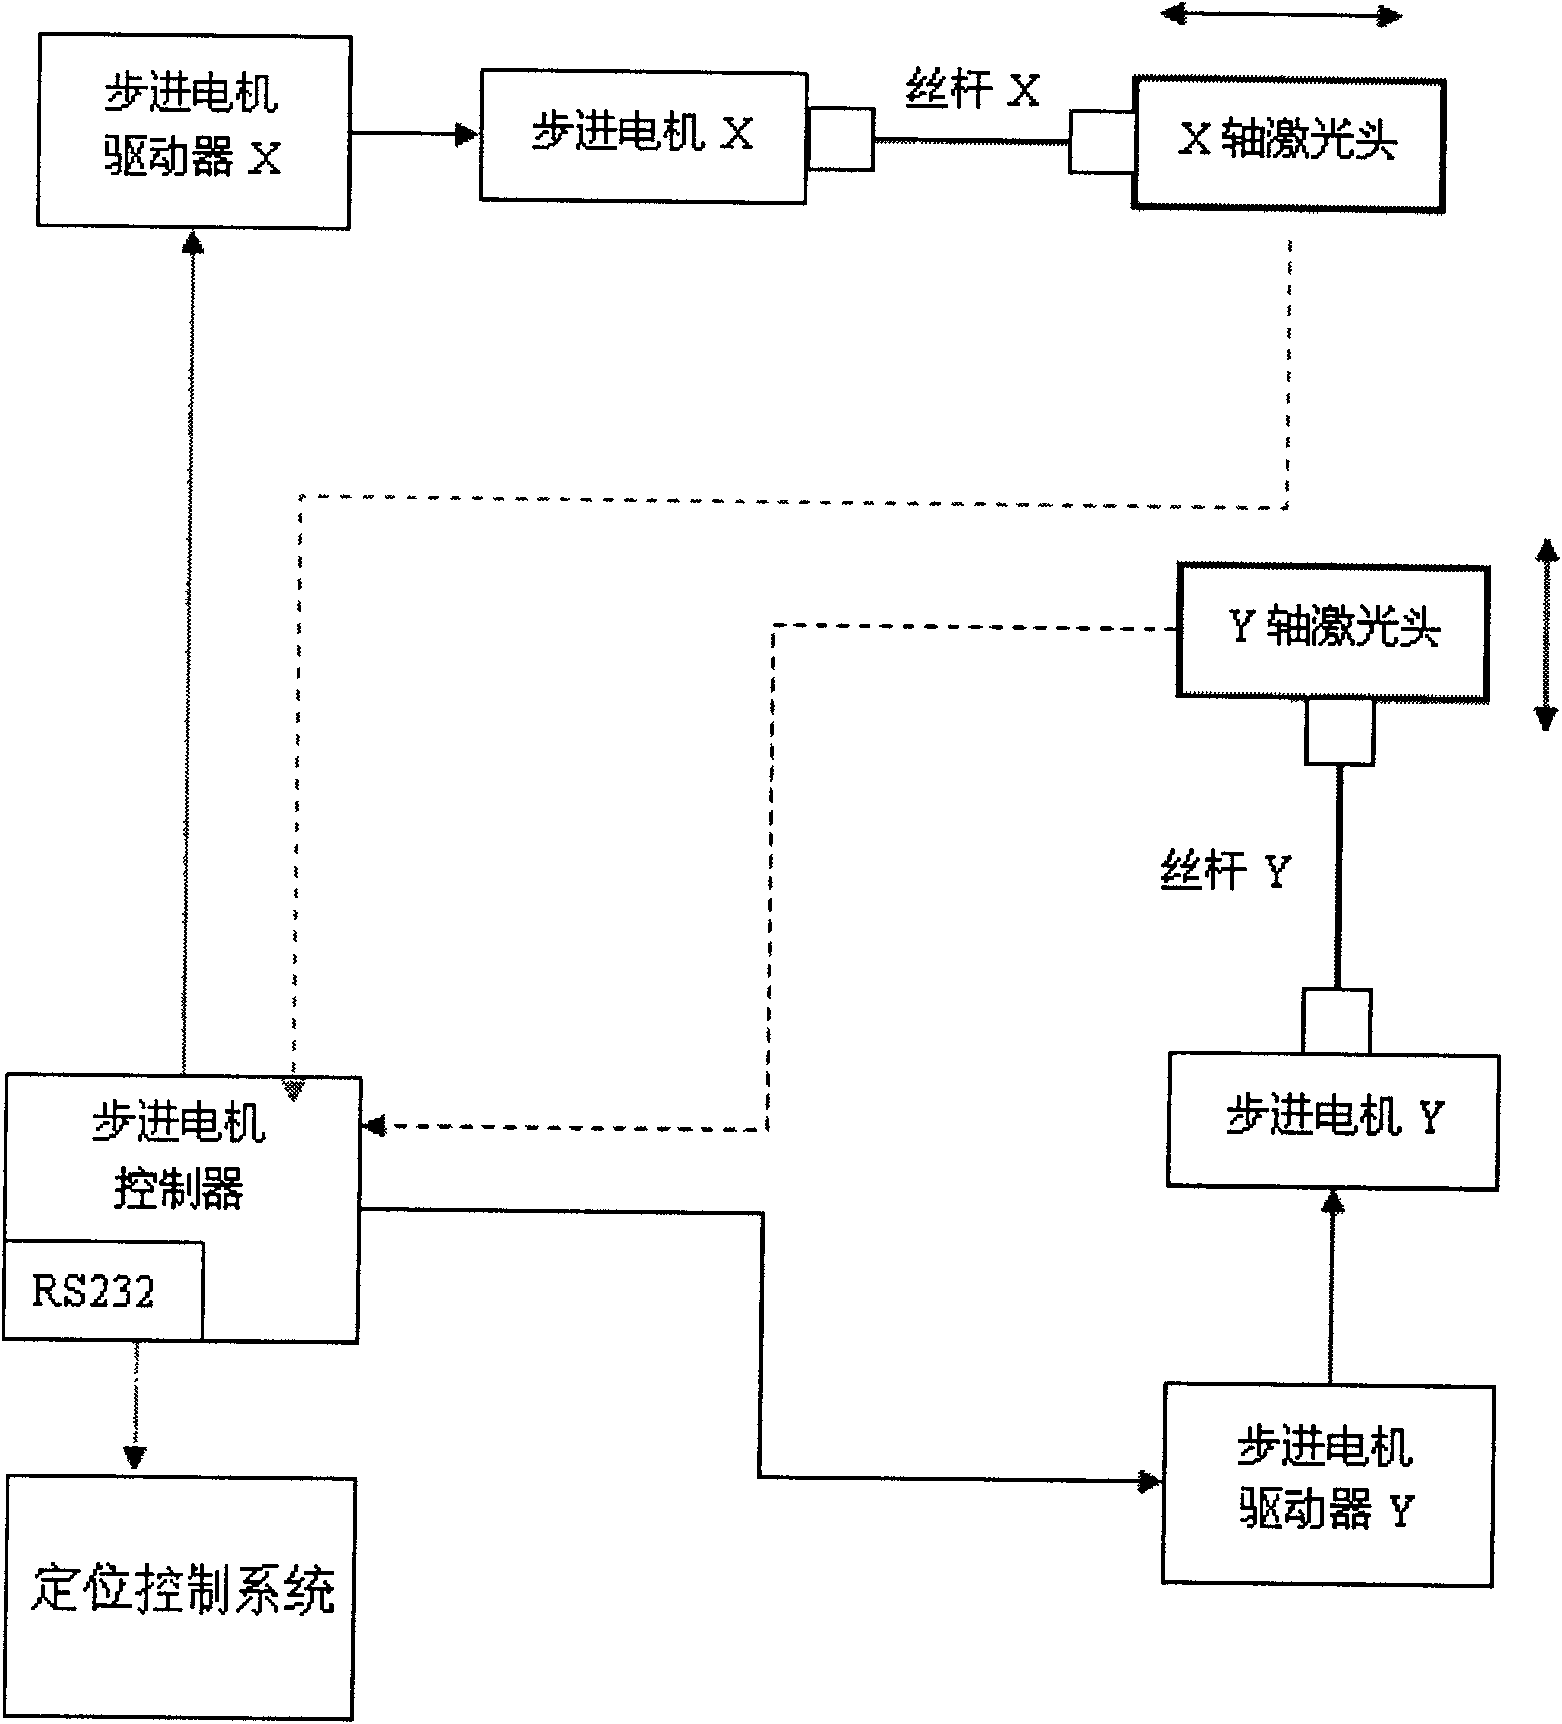 Perspective navigation method used for C-arm type X-ray machine